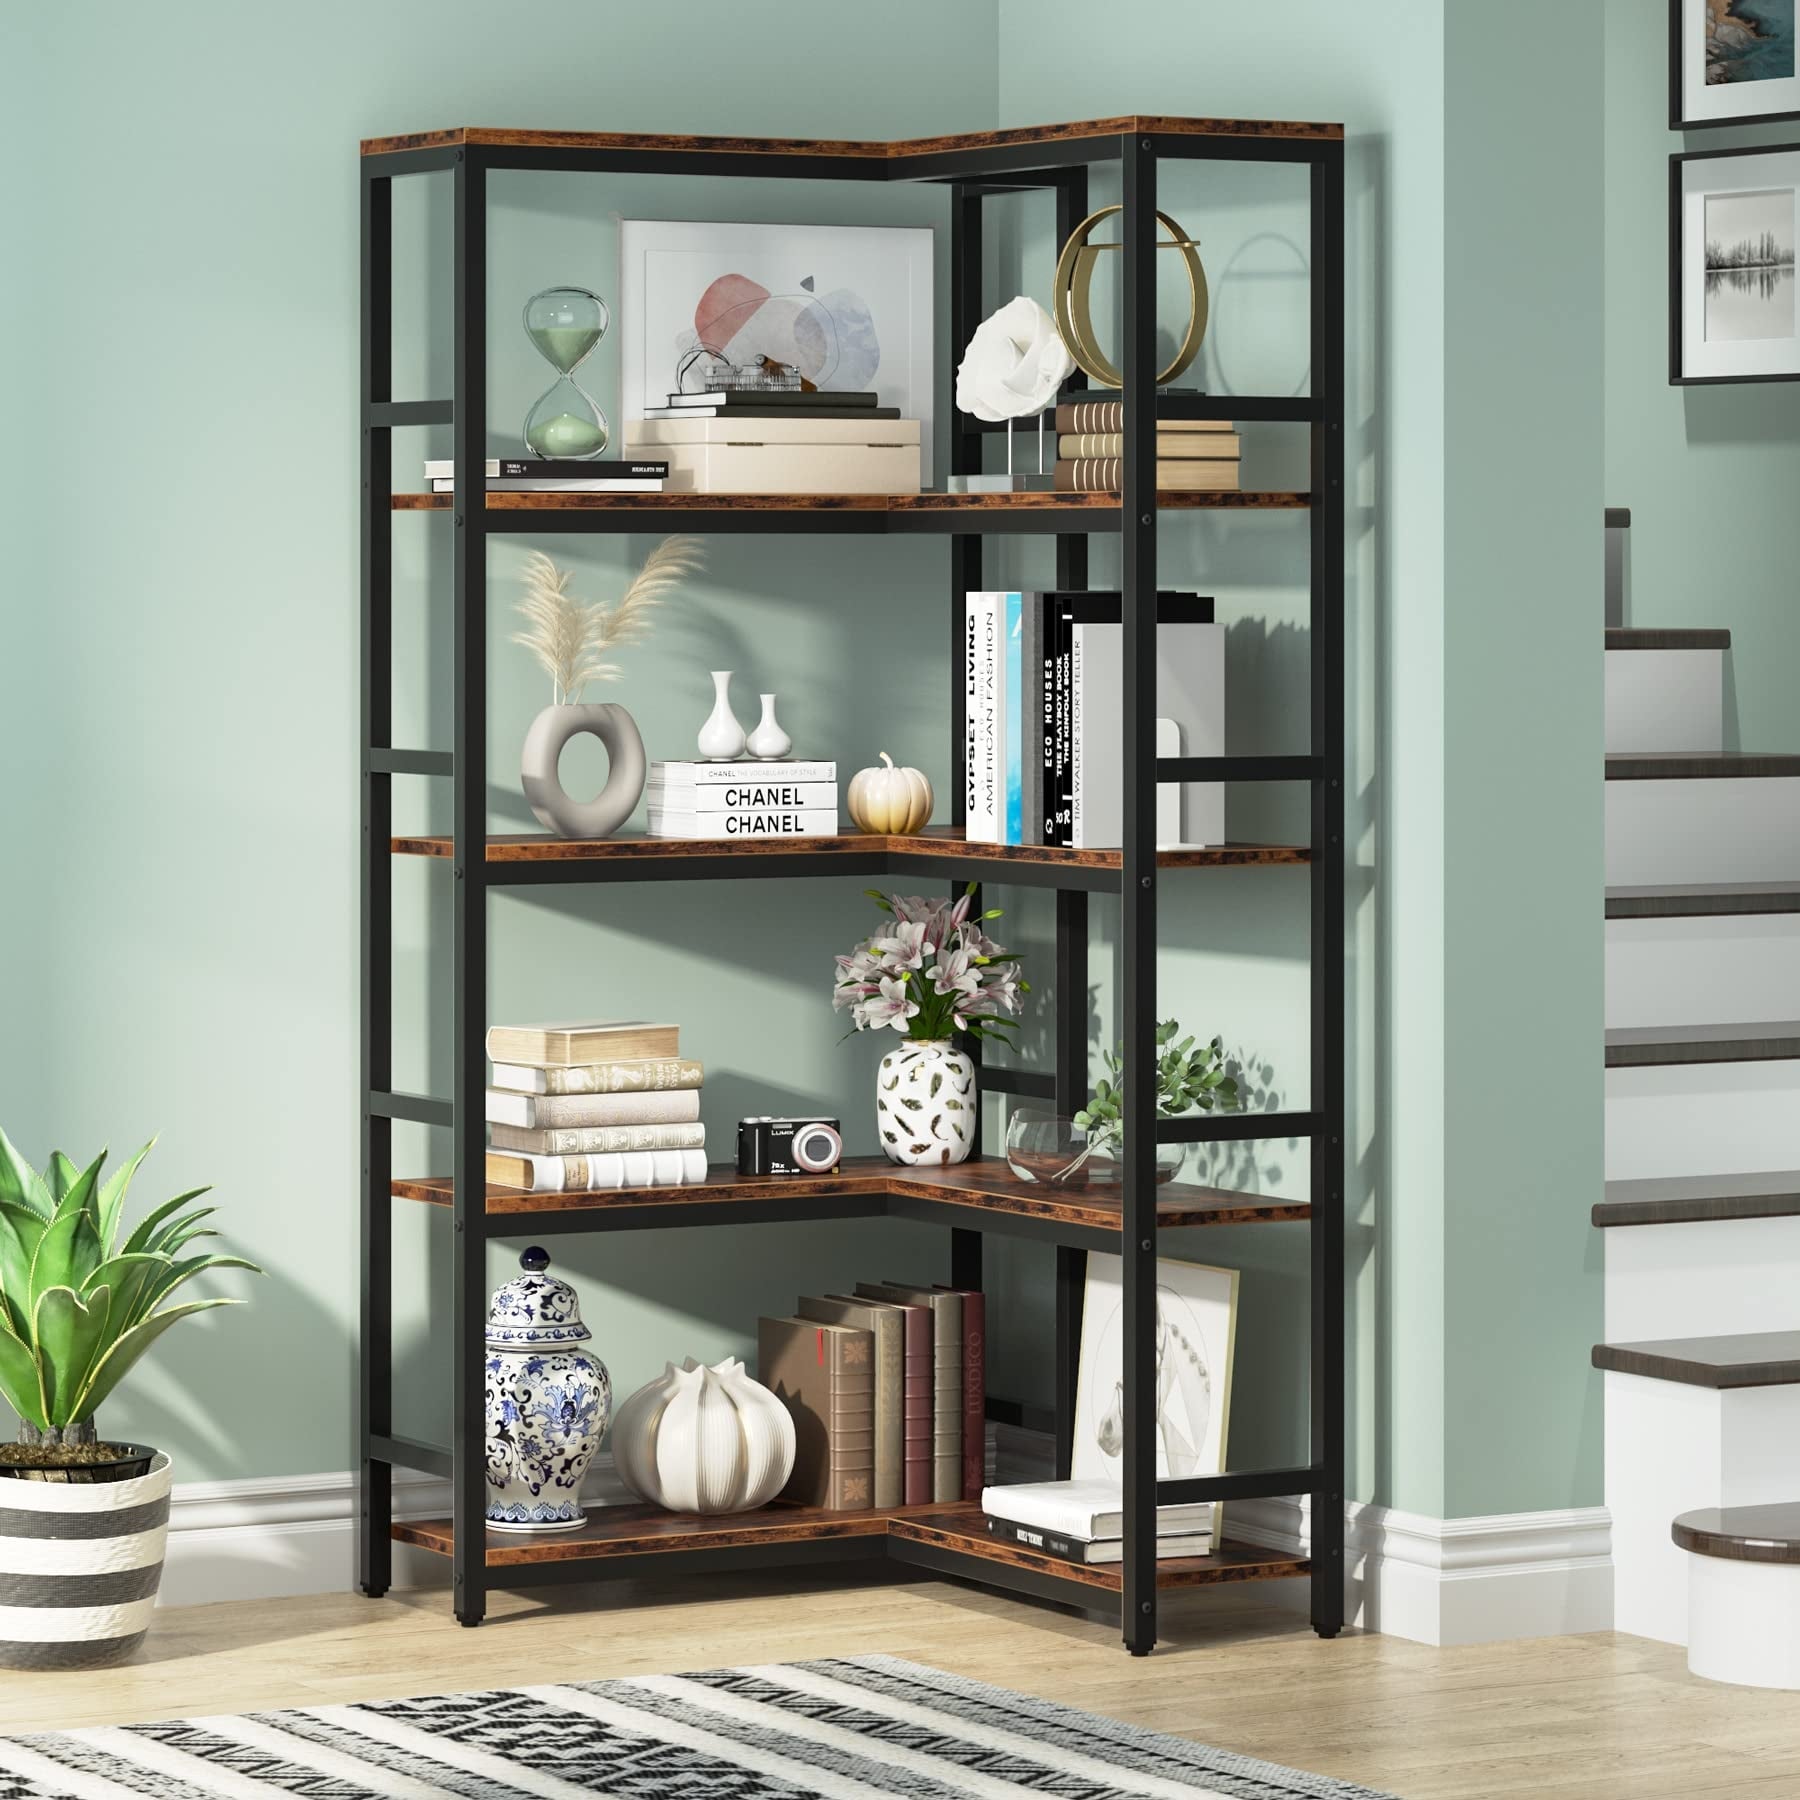 https://ak1.ostkcdn.com/images/products/is/images/direct/2058334375c860a143374a93883c5f511ec59c0d/5-Tier-Corner-Bookshelf%2C-Industrial-Large-Corner-Etagere-Bookcase-for-Living-Room-Home-Office%2C-Rustic-Brown.jpg